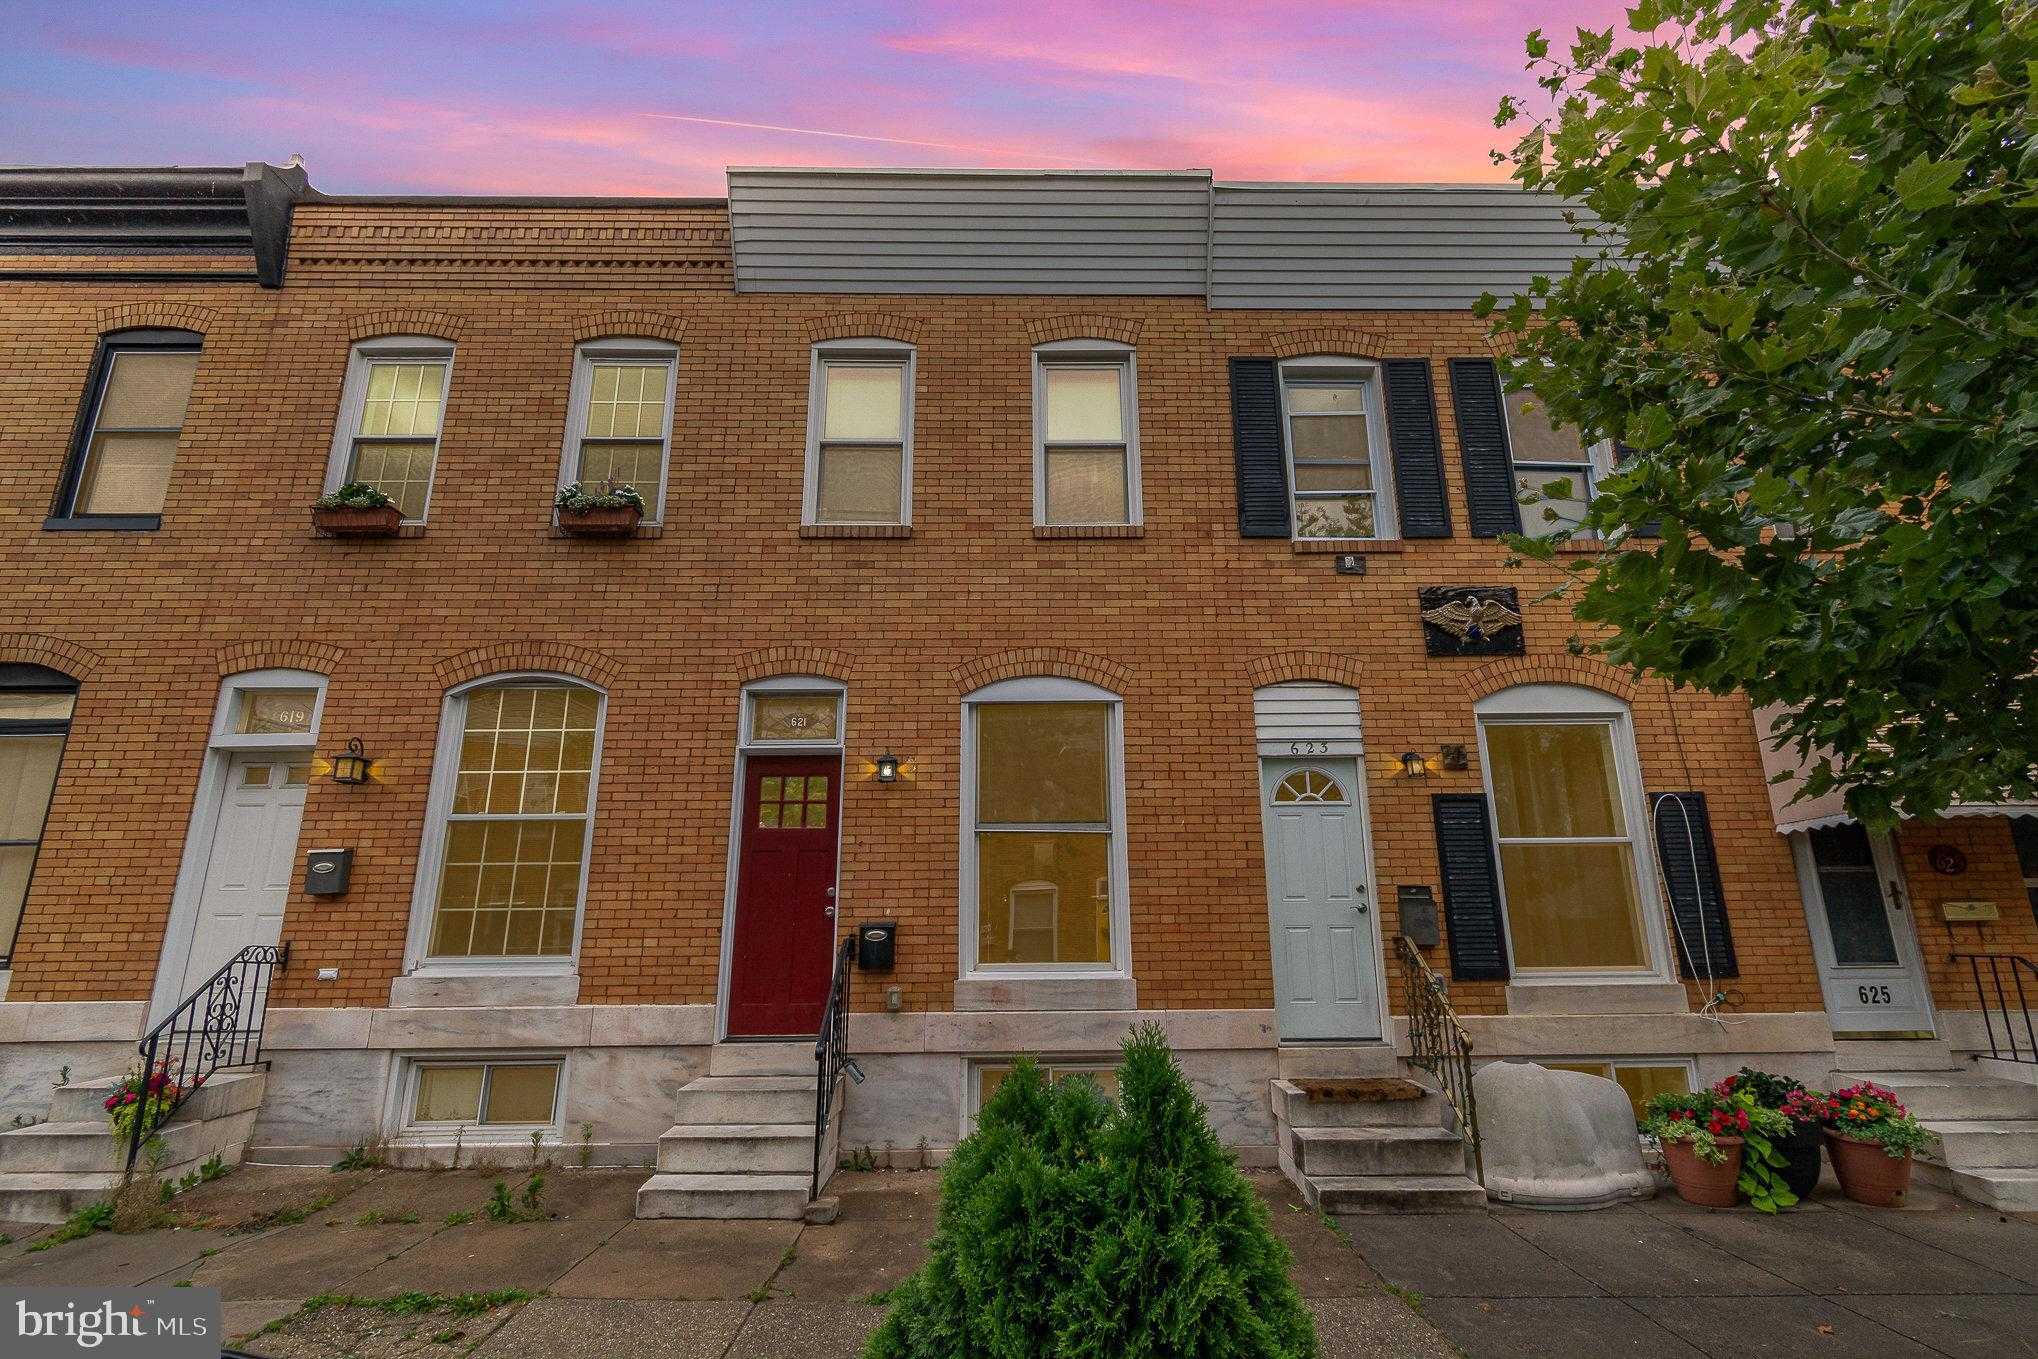 View BALTIMORE, MD 21224 townhome